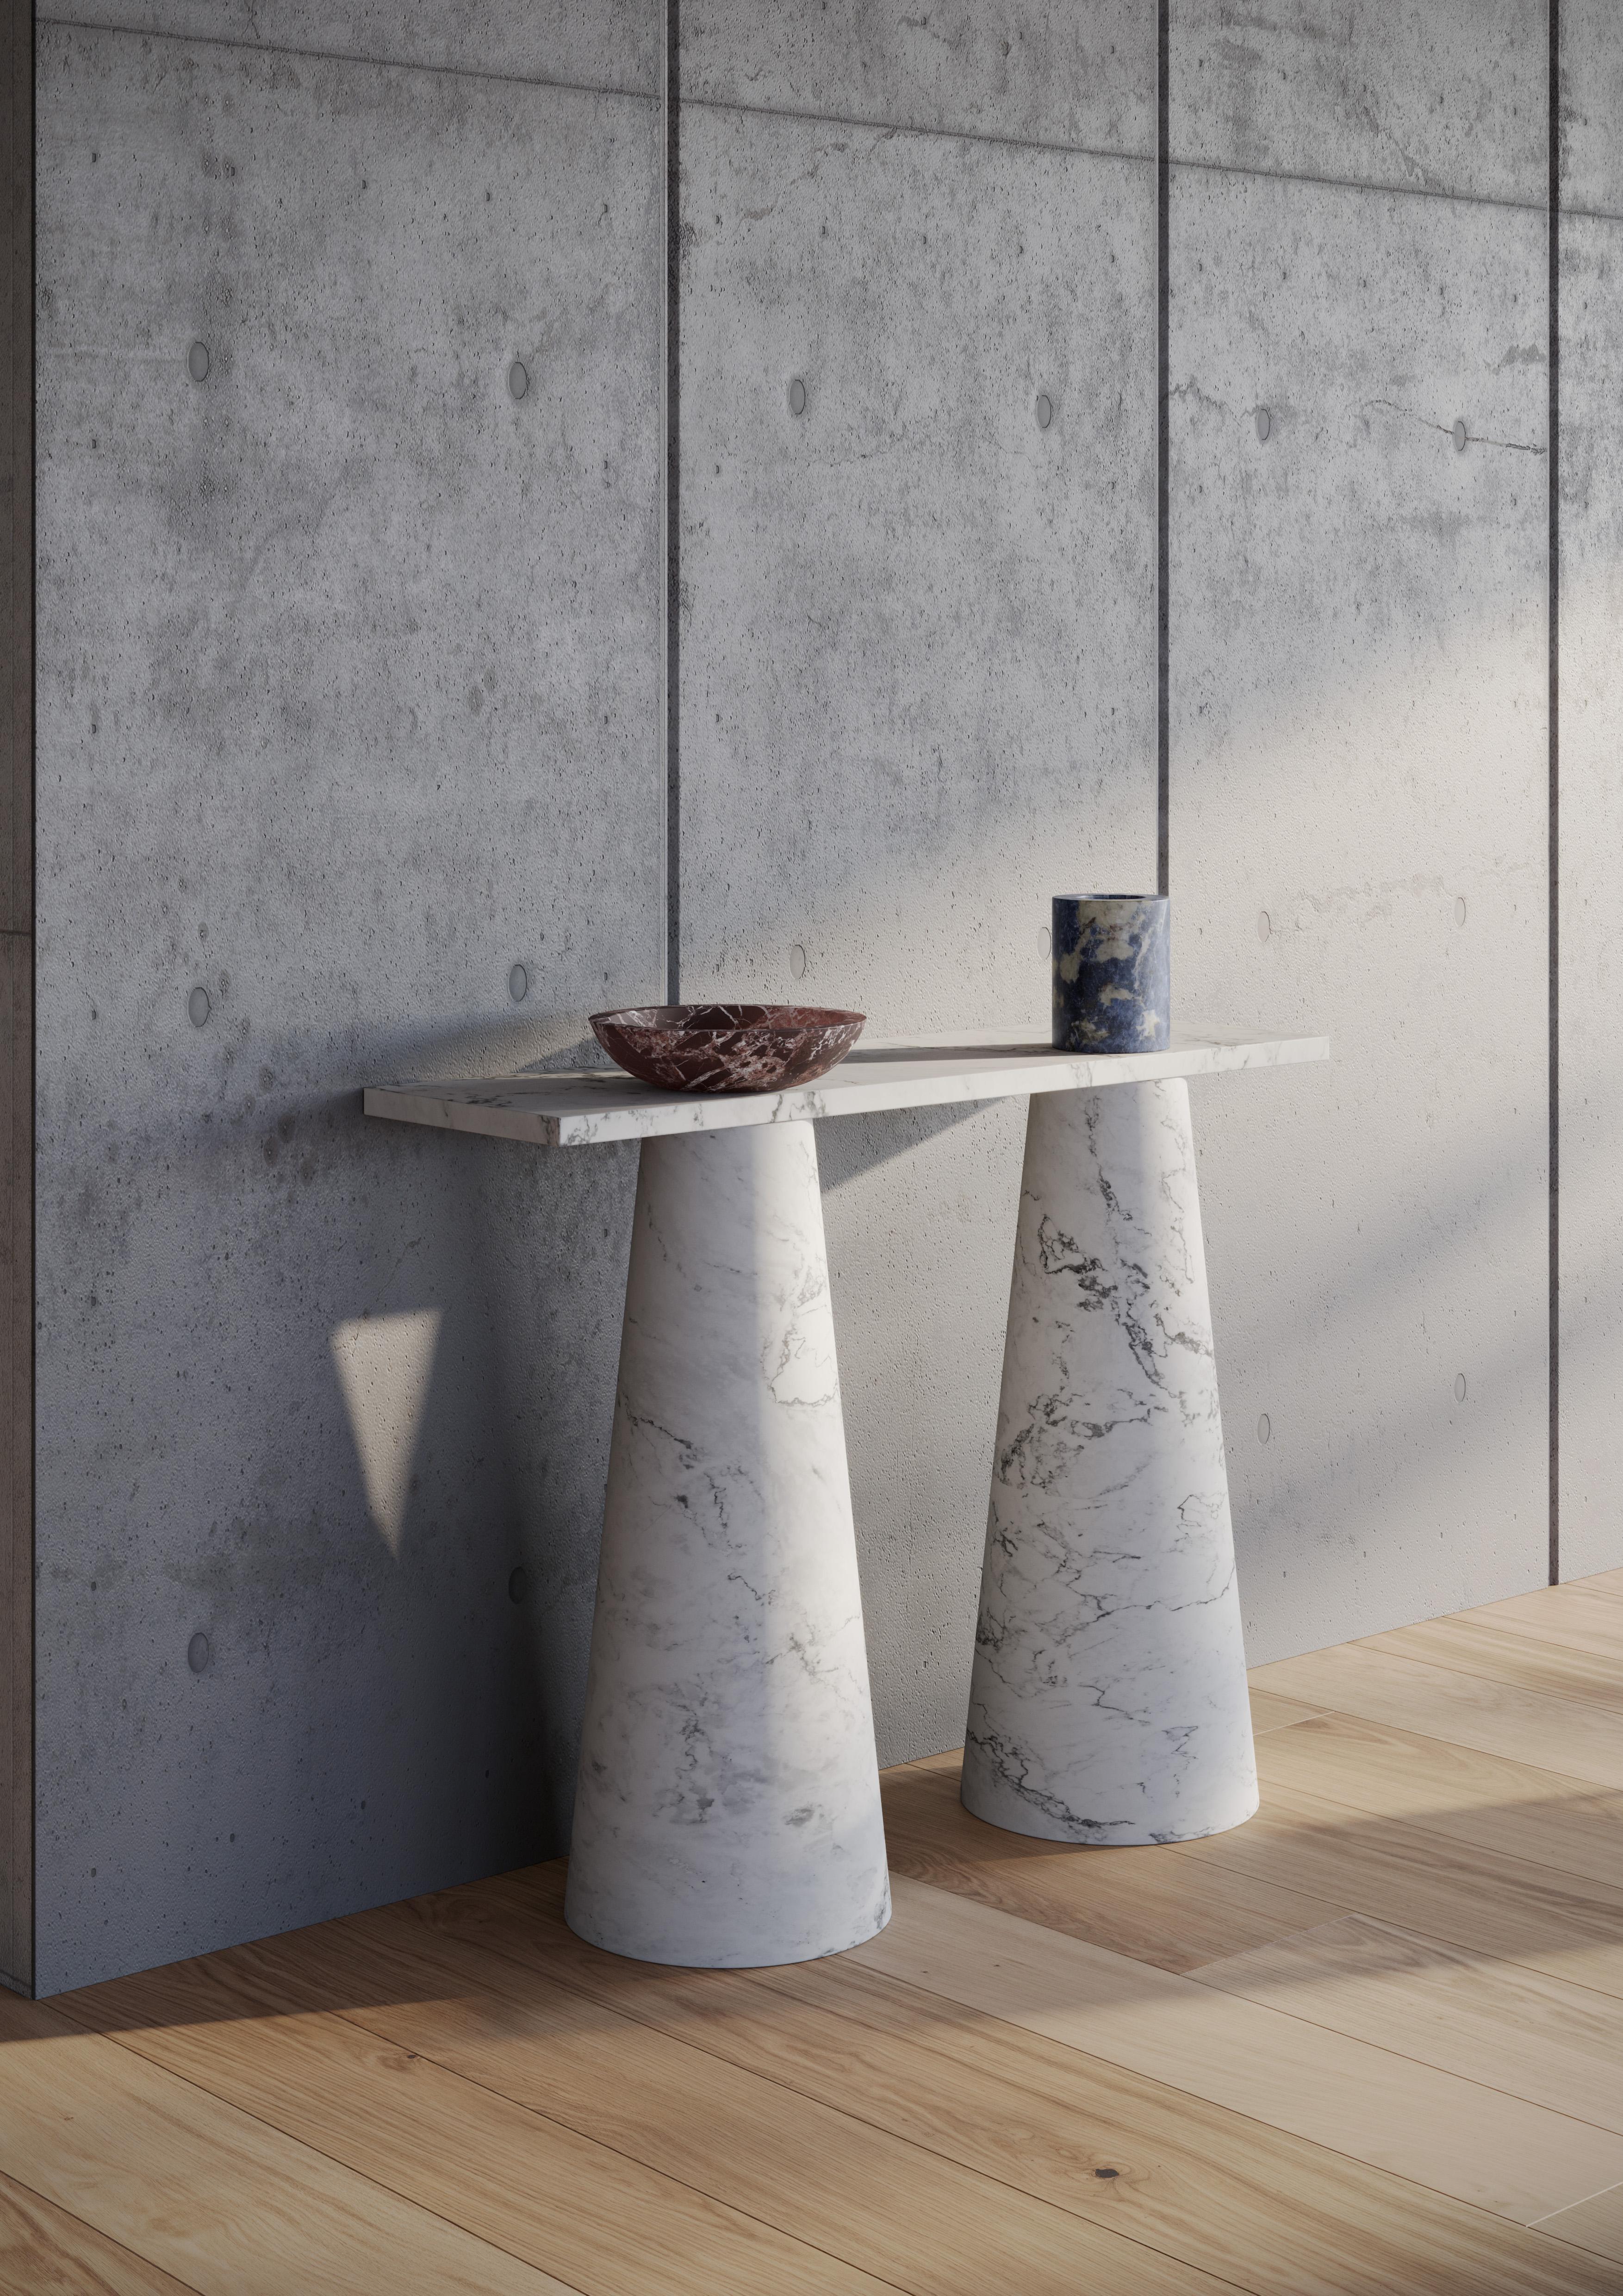 White marble Console designed by Karen Chekerdjian, part of the Inside Out Collection - accessories (fruit bowl, candles, flower vases, tables in red and black marble).

An endlessly astonishing design, Inside Out is available as a table and console